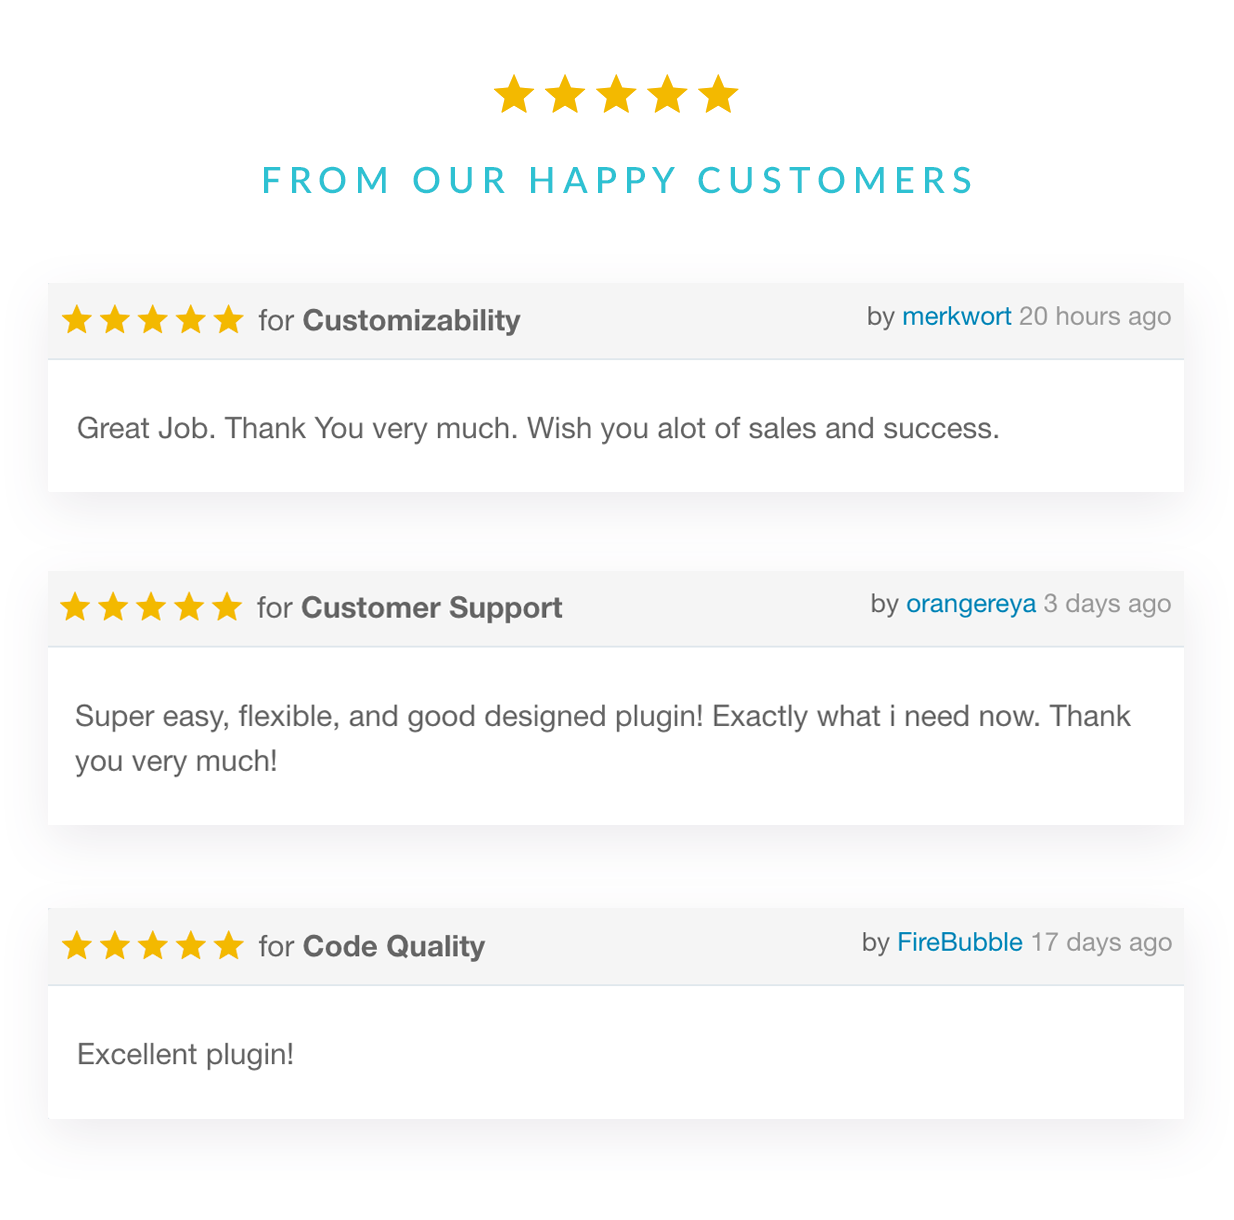 Five star ratings from our happy customers